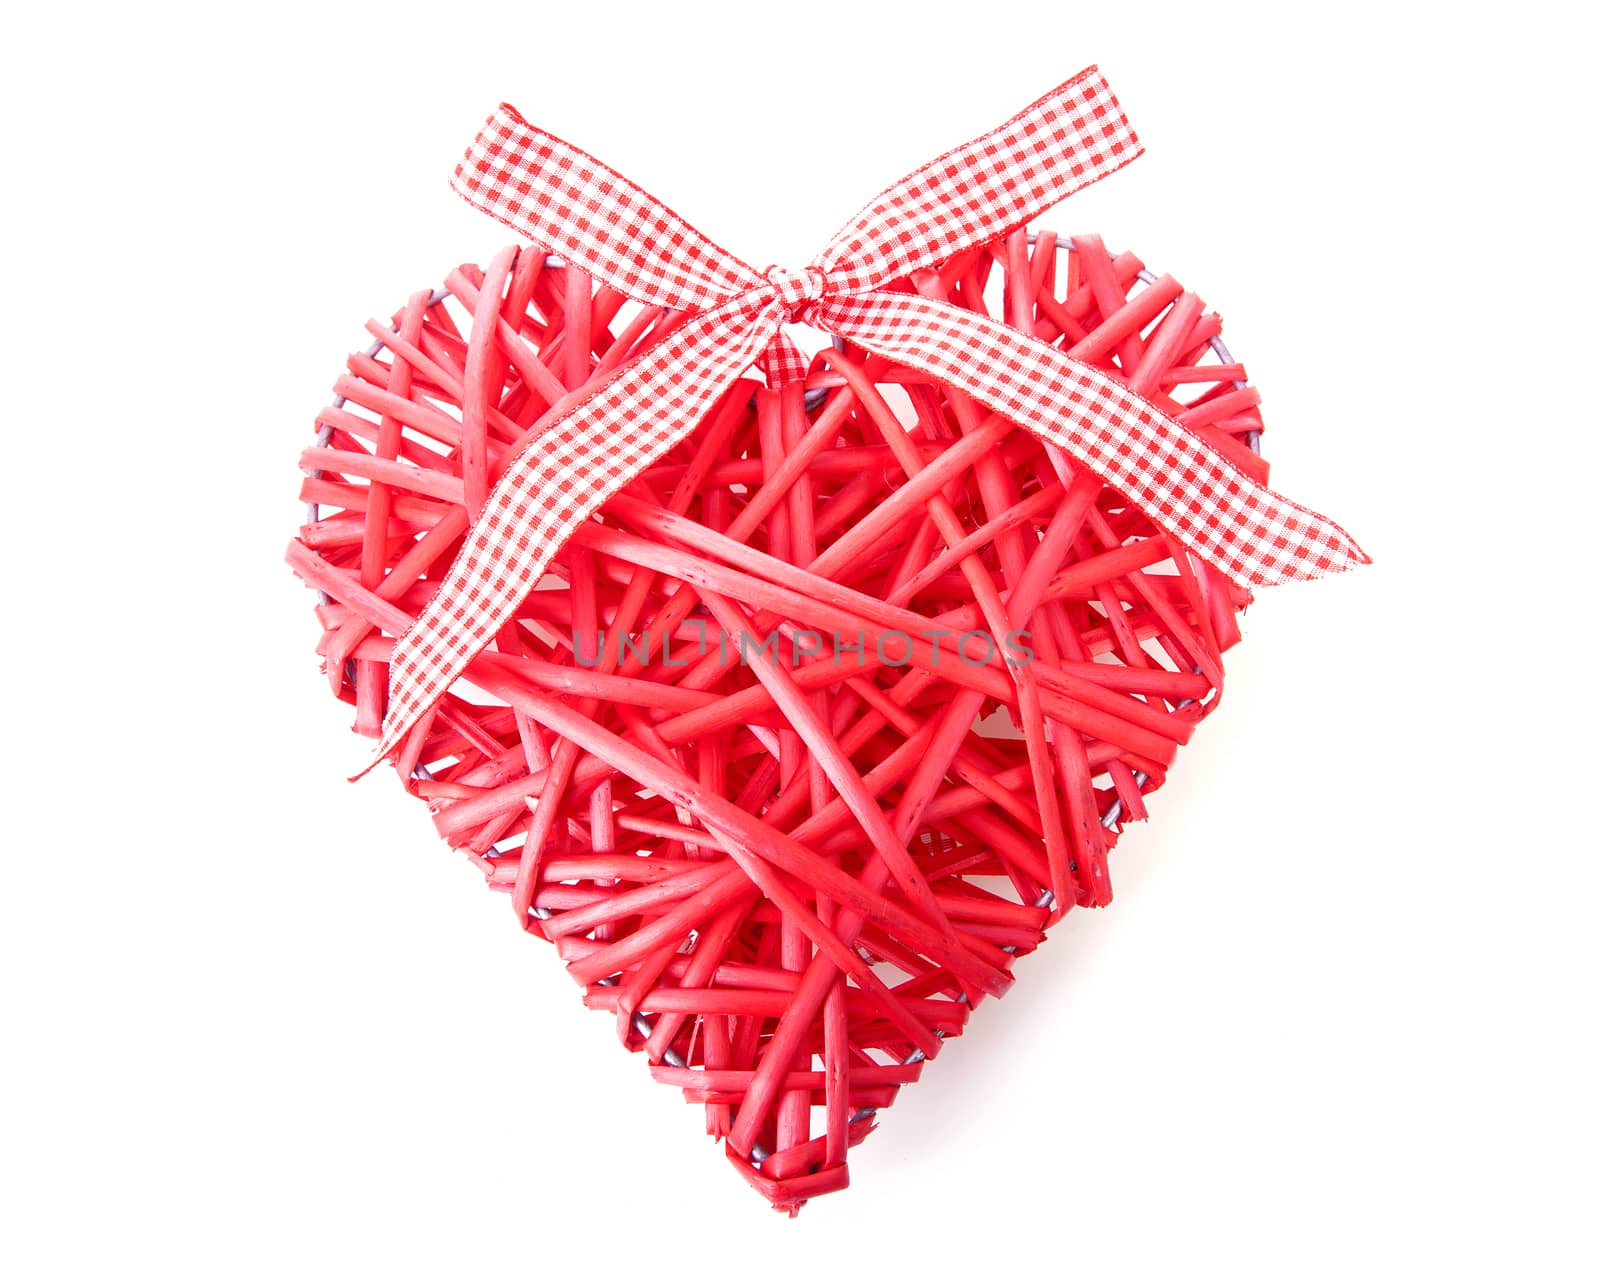 Red heart made of reed over white background